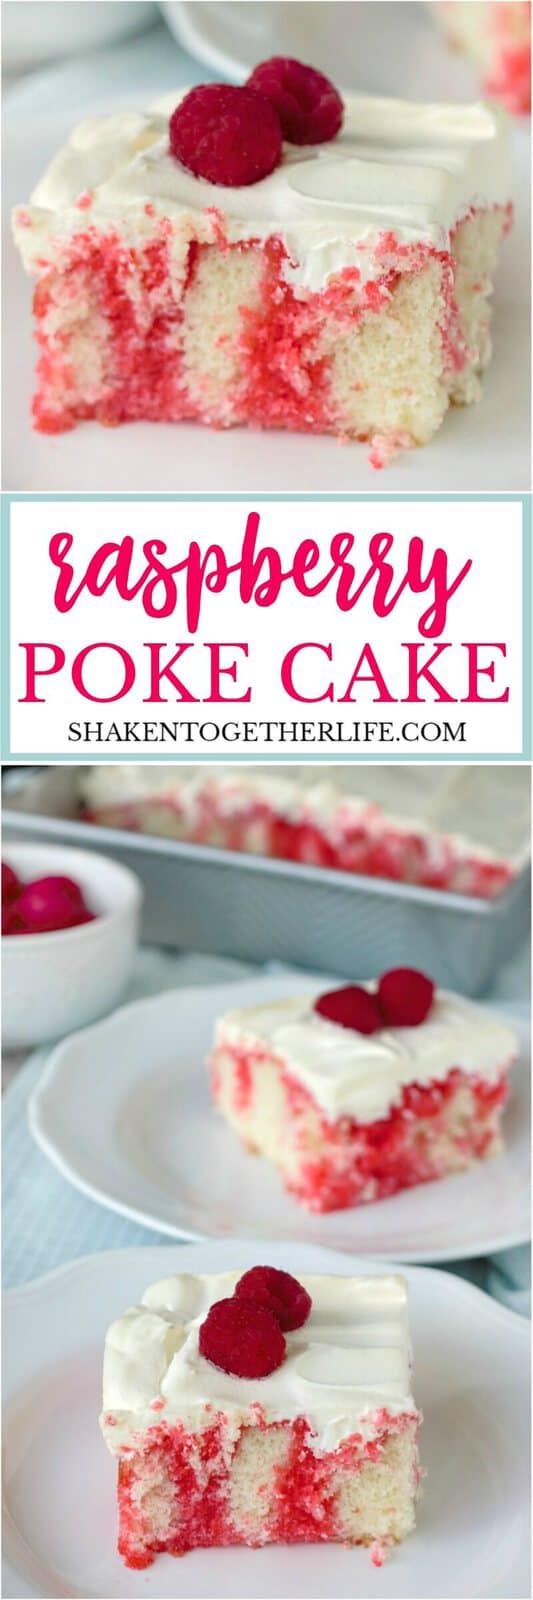 Raspberry Poke Cake is a soft white cake drenched in raspberry Jell-o, topped with whipped topping and then fresh raspberries. It is sweet and tangy, fruity and fabulous!